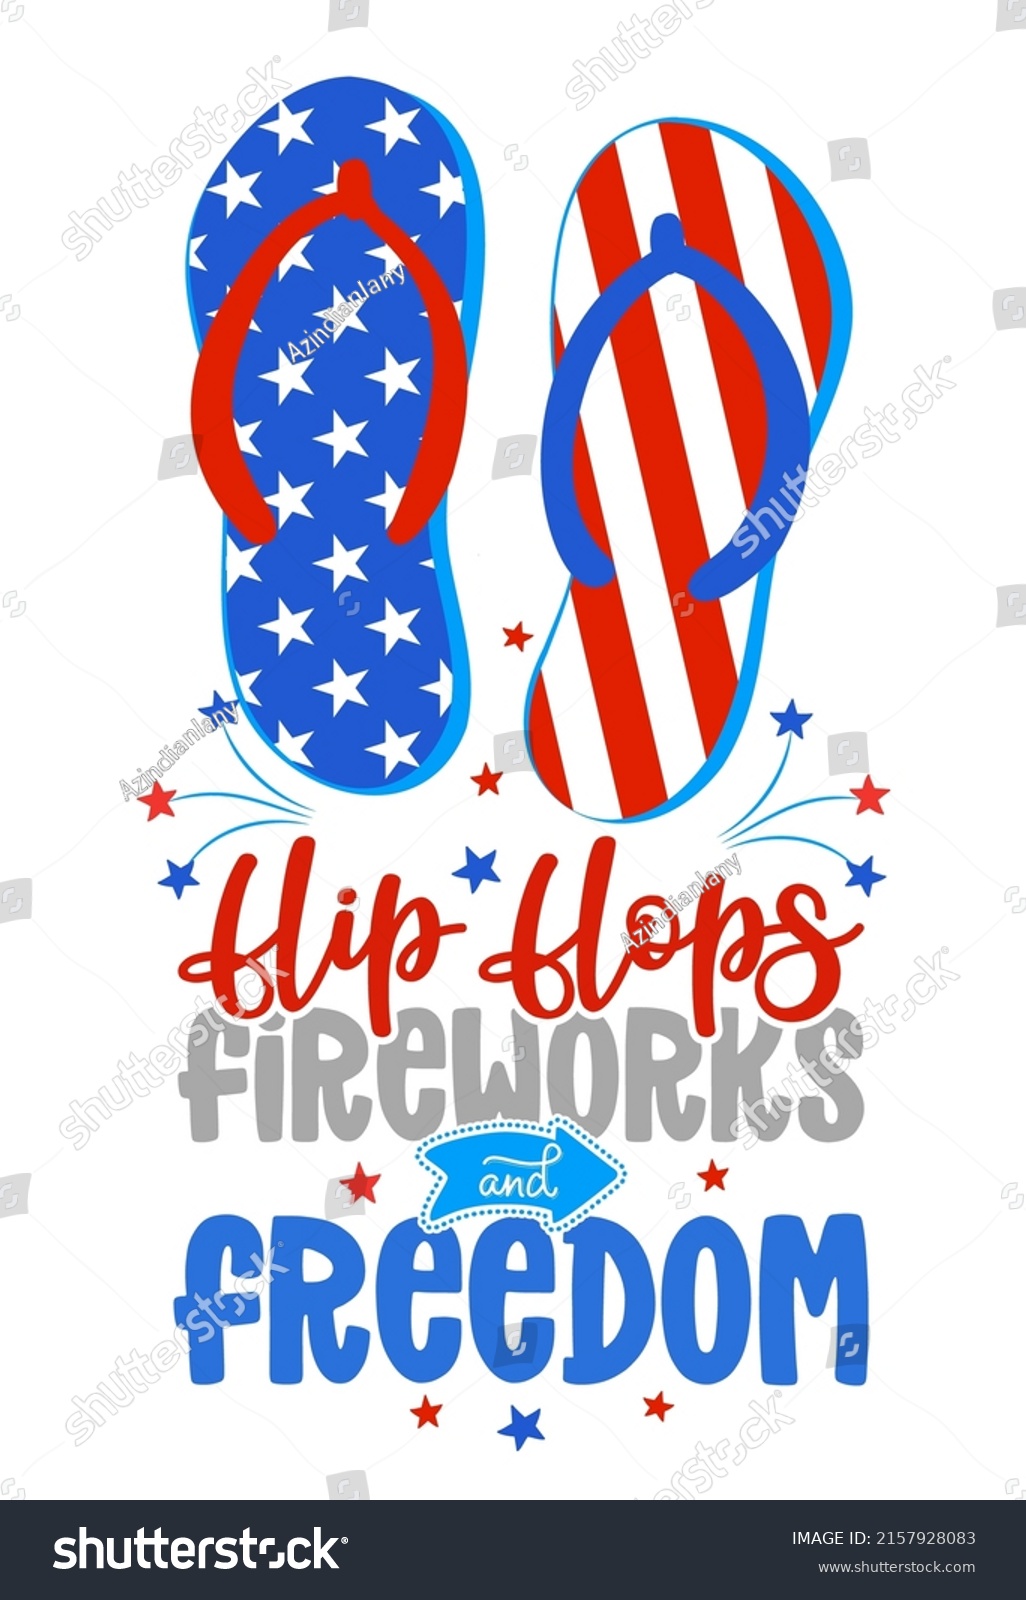 SVG of Flip-flops, fireworks and freedom - red white and blue flip flop beach footwear with lovely summer quote. Cute hand drawn slippers. Happy Independence Day! svg